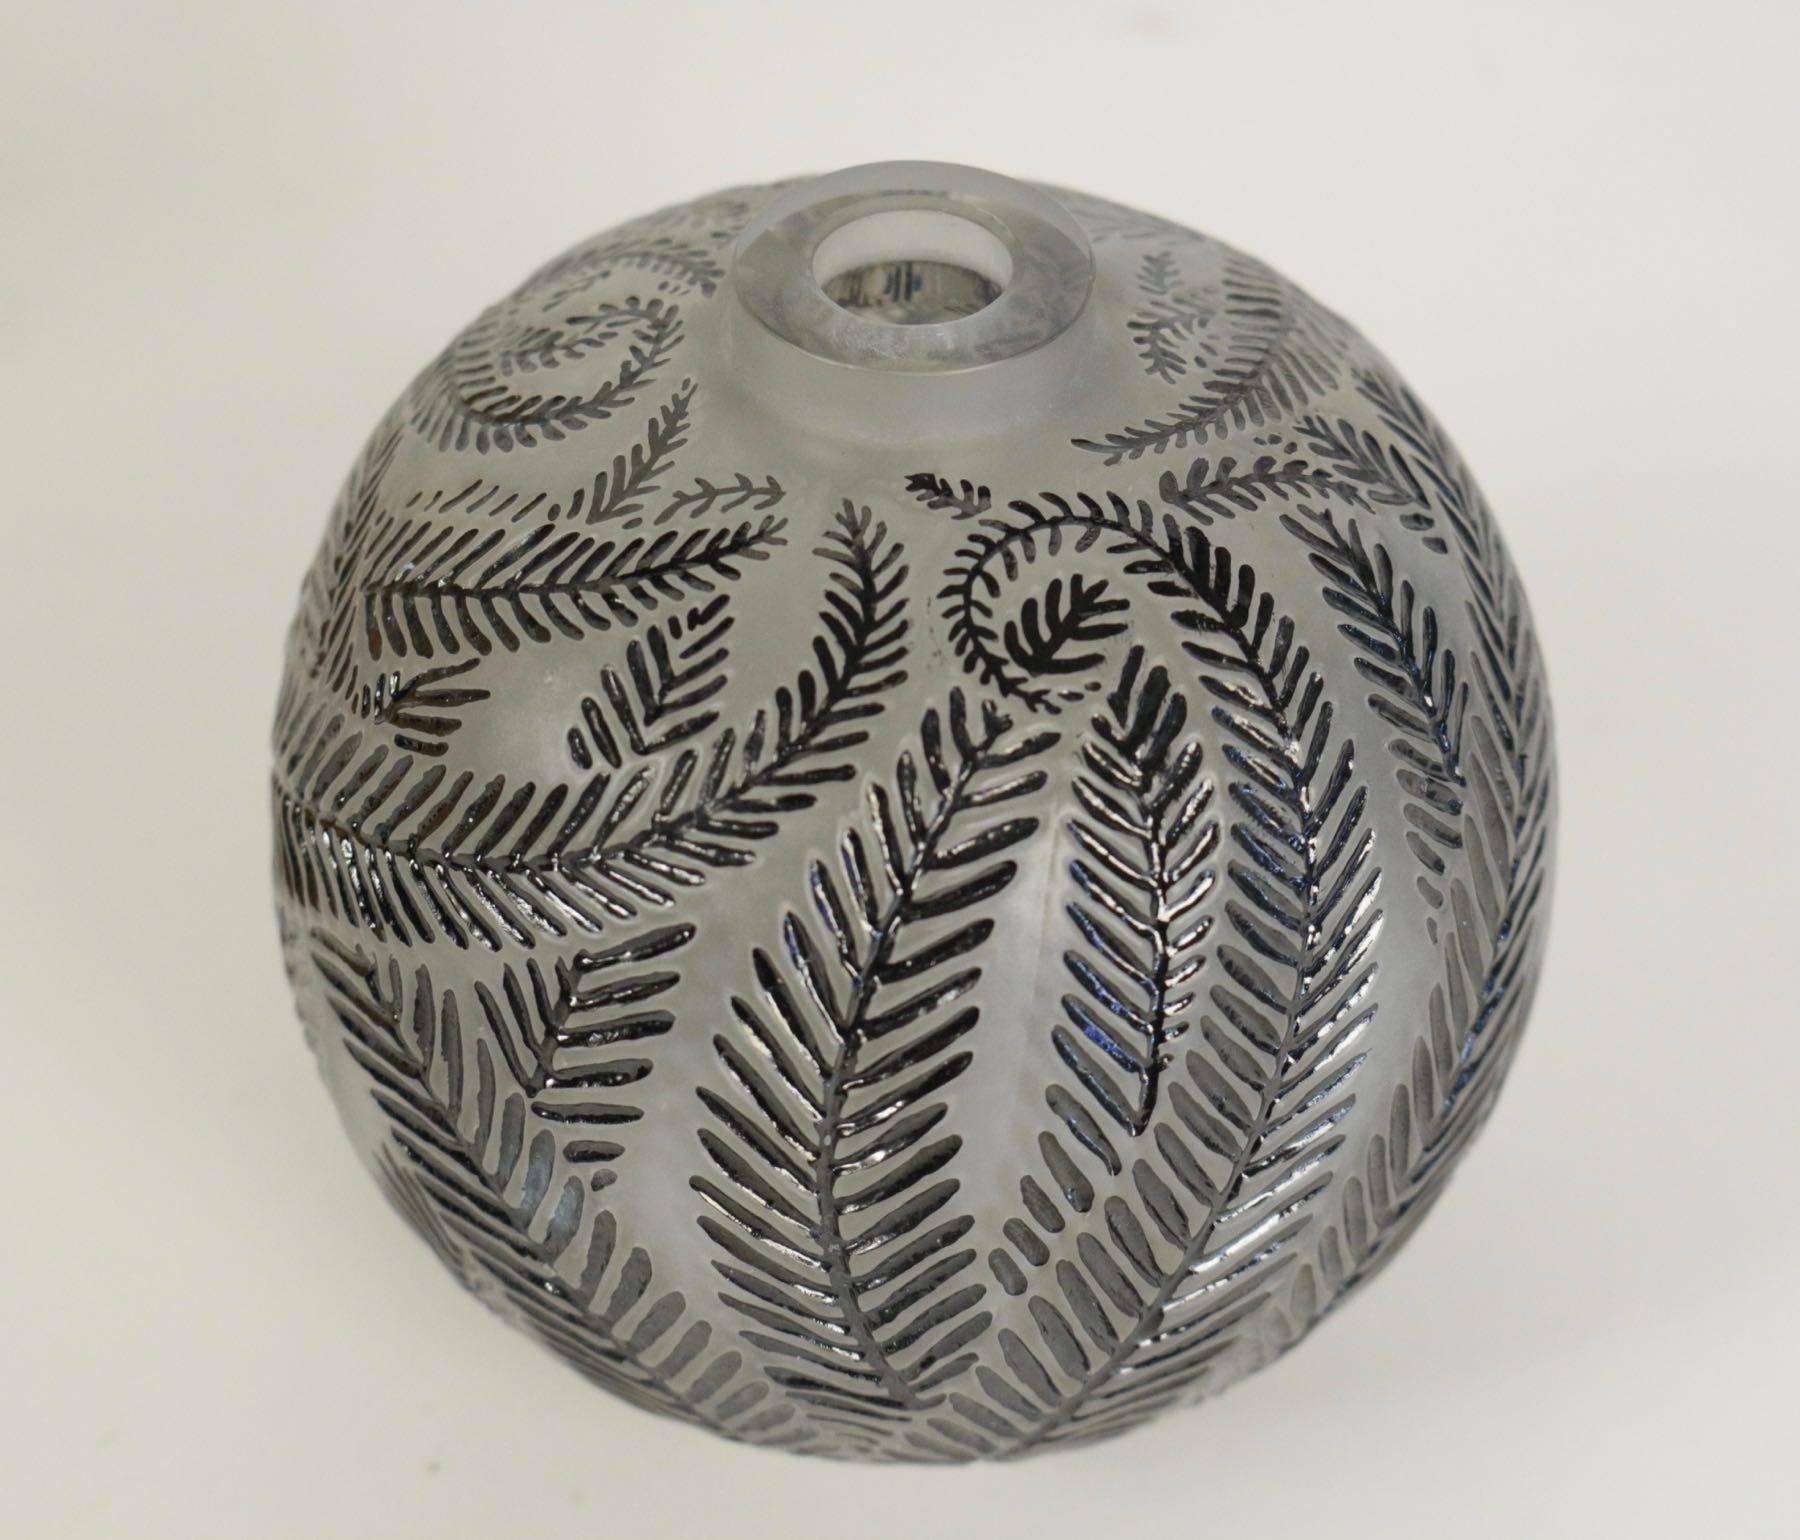 Pressed molded vase frosted and black enemaled.
Palm leaf decorated black enemaled on frosted ground.
Art glass vase of globe form covered with all-over palm leaf motif under small rim surrounding round opening at top.
Signed on bottom 